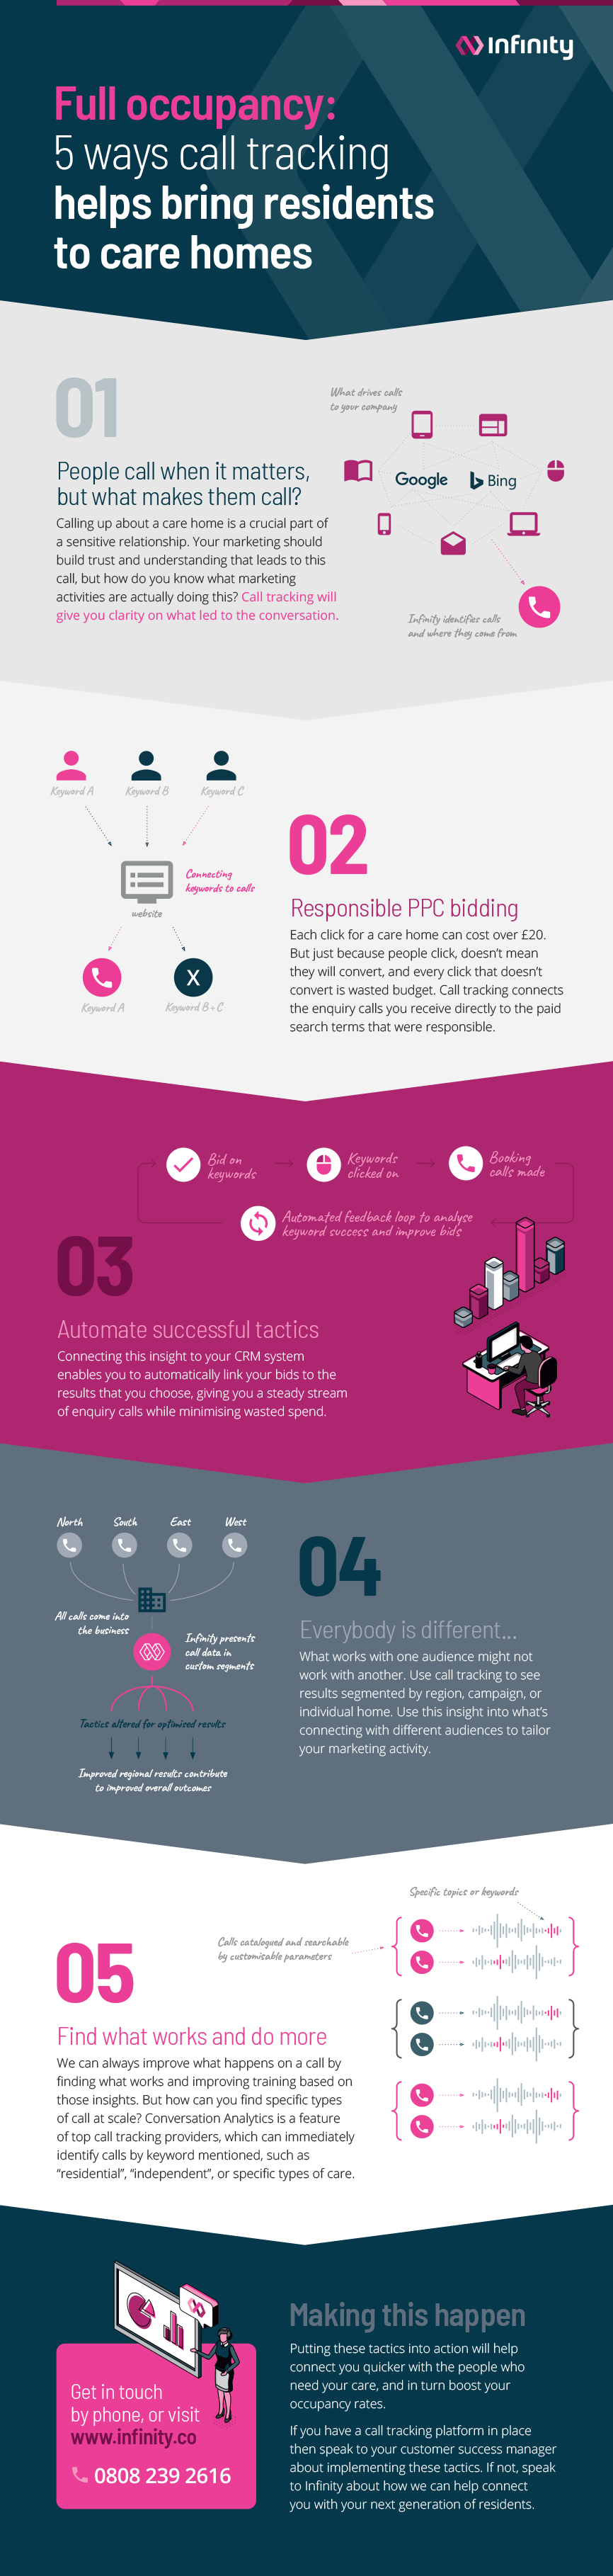 5 Ways Call Tracking Leads To Full Occupancy - Infinity Care Homes Infographic.png